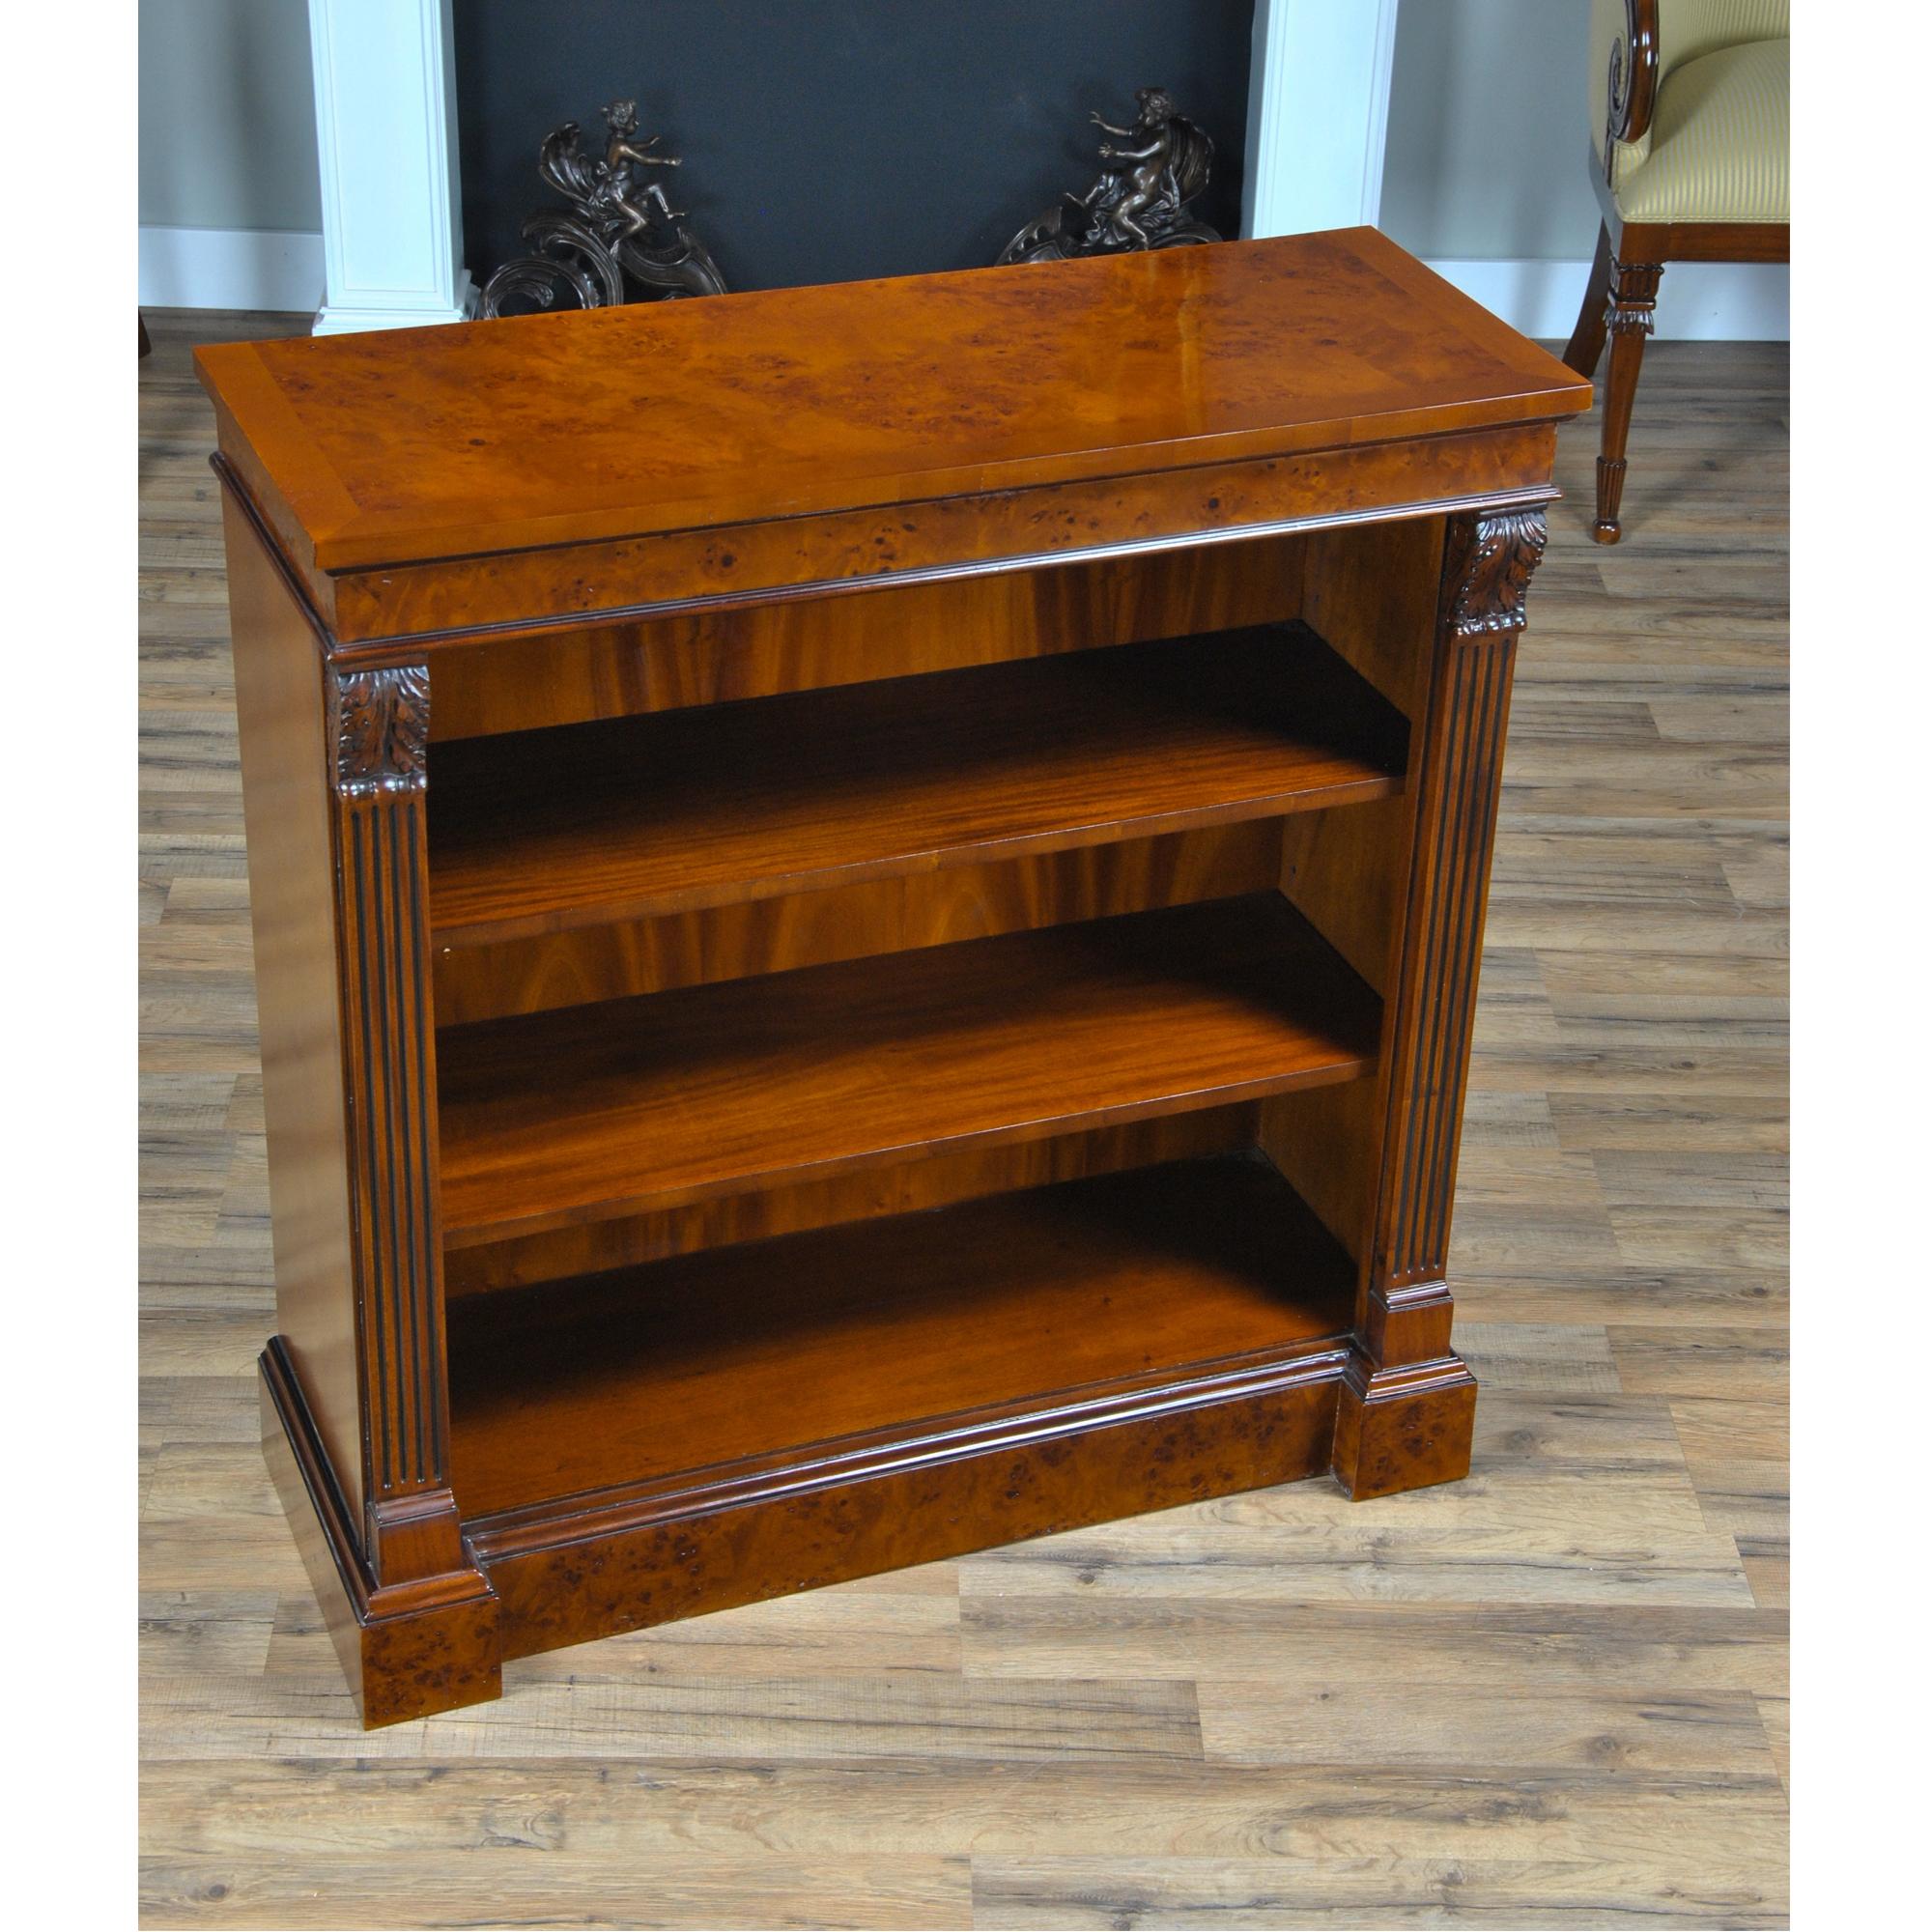 The Niagara Furniture Small Burled Penshurst Bookcase with two shelves. The burled cornice is beautiful and adds a sense of depth to the upper area of the case while hand carved acanthus style, solid mahogany brackets and reeded columns lend a sense